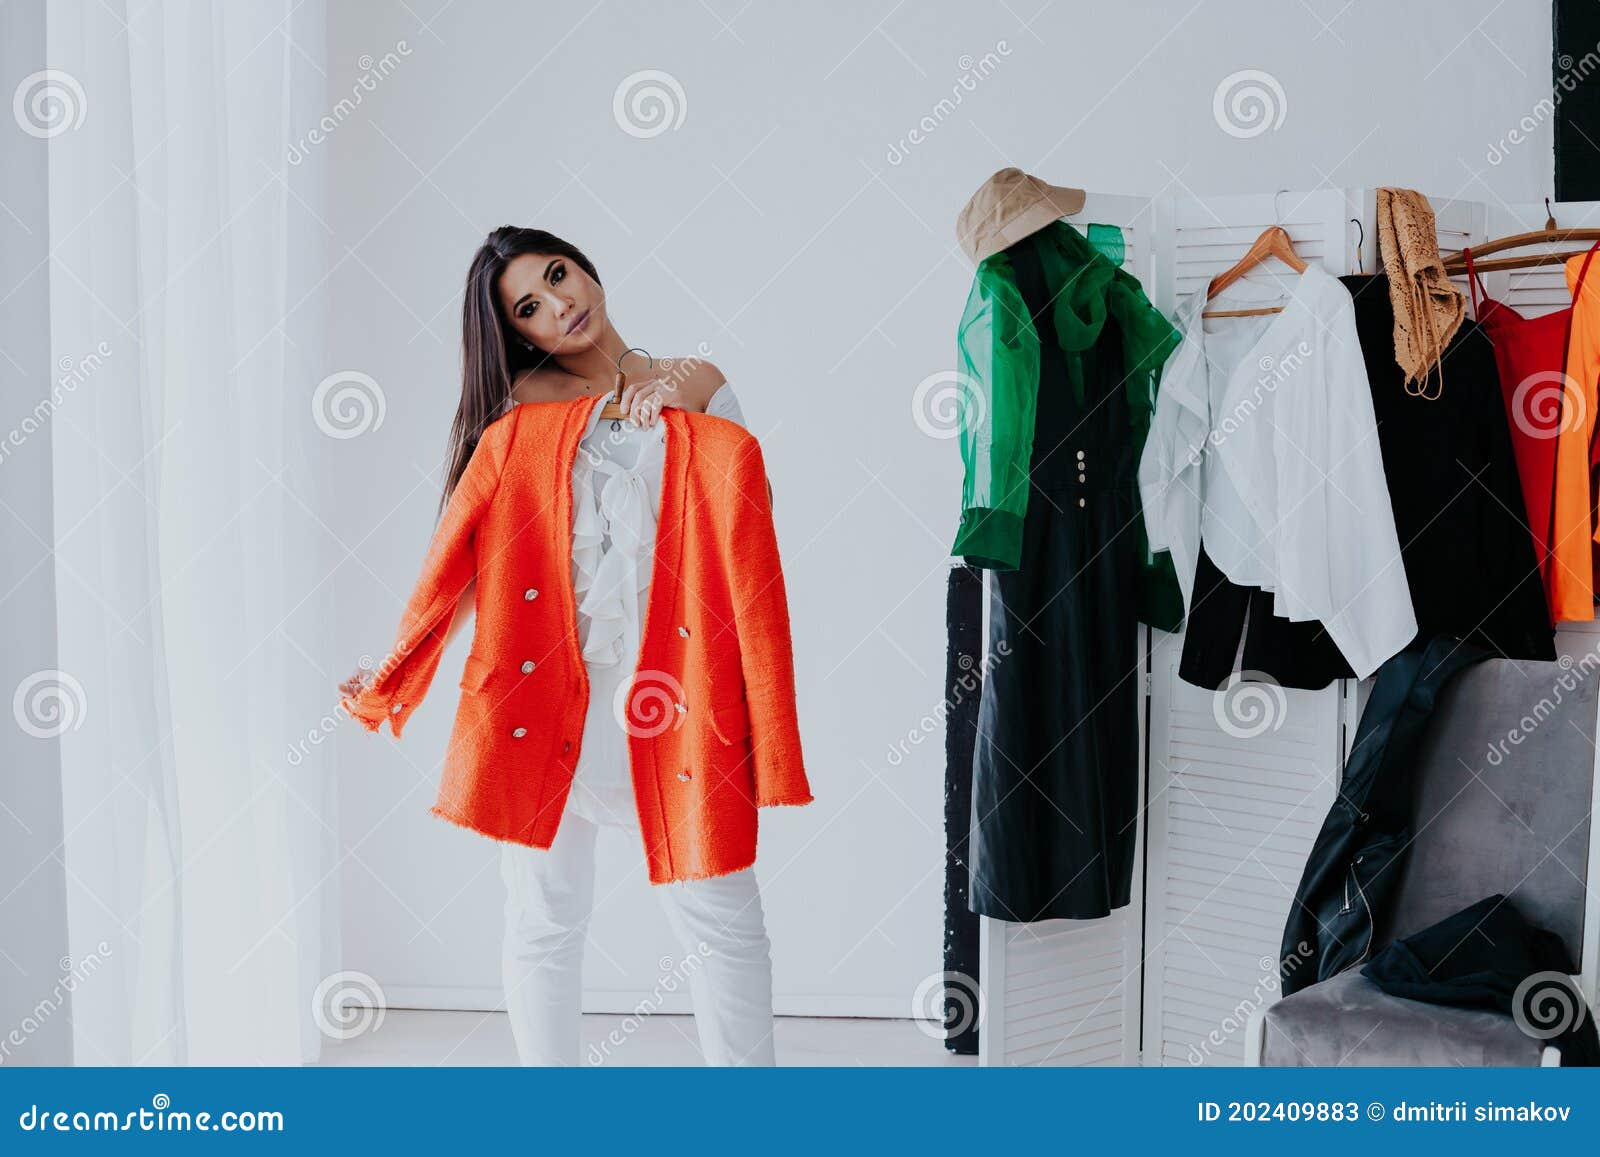 shopping woman trying clothes. woman choosing between summer dresses looking in mirror.